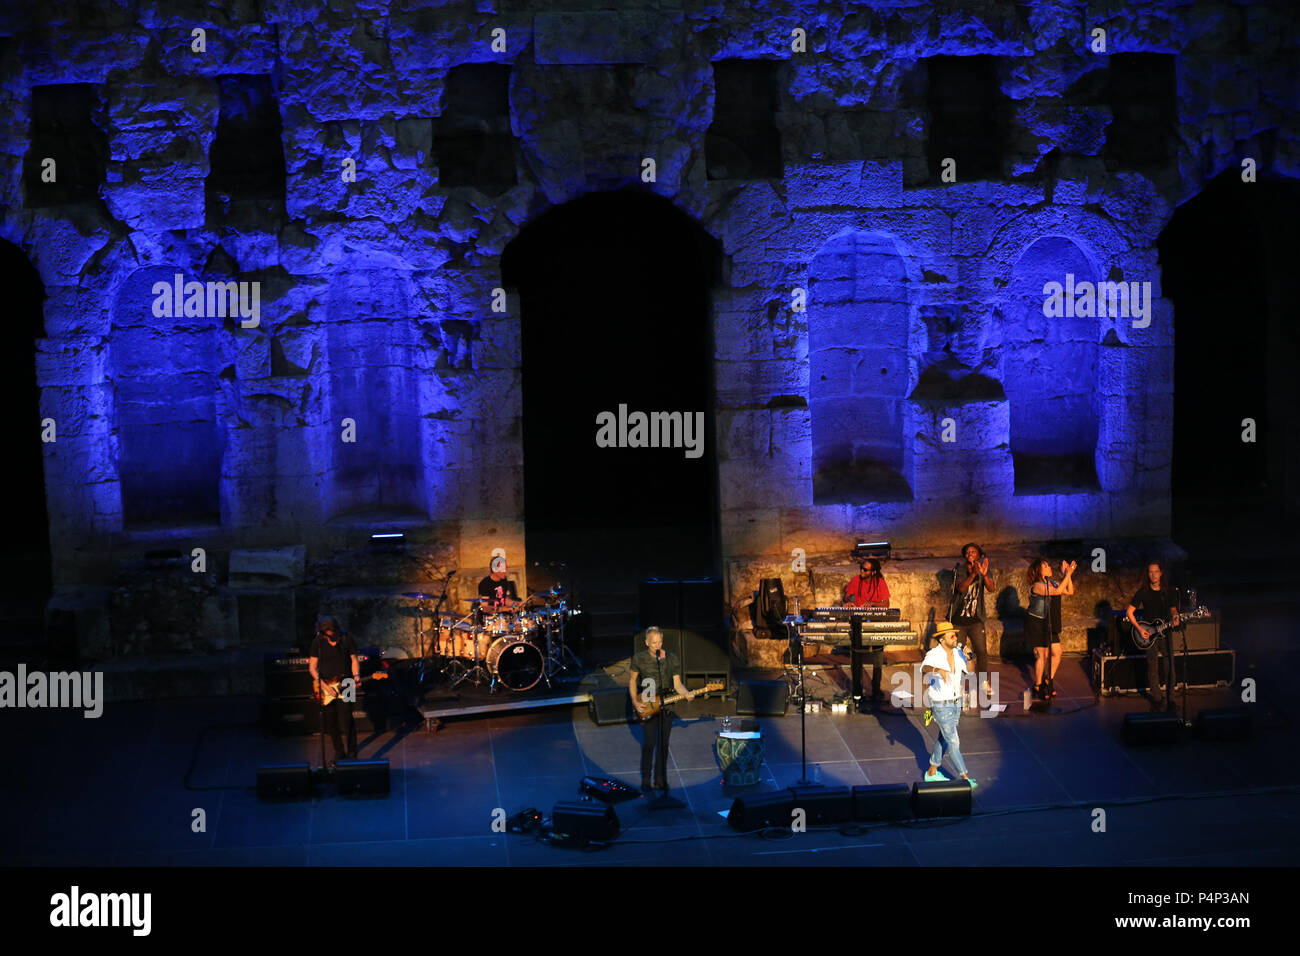 Athens, Greece. 22nd June, 2018. British singer Sting performs during his  solo concert at Odeon of Herodes Atticus under Acropolis foot in Athens,  Greece, June 22, 2018. Sting's concert is part of